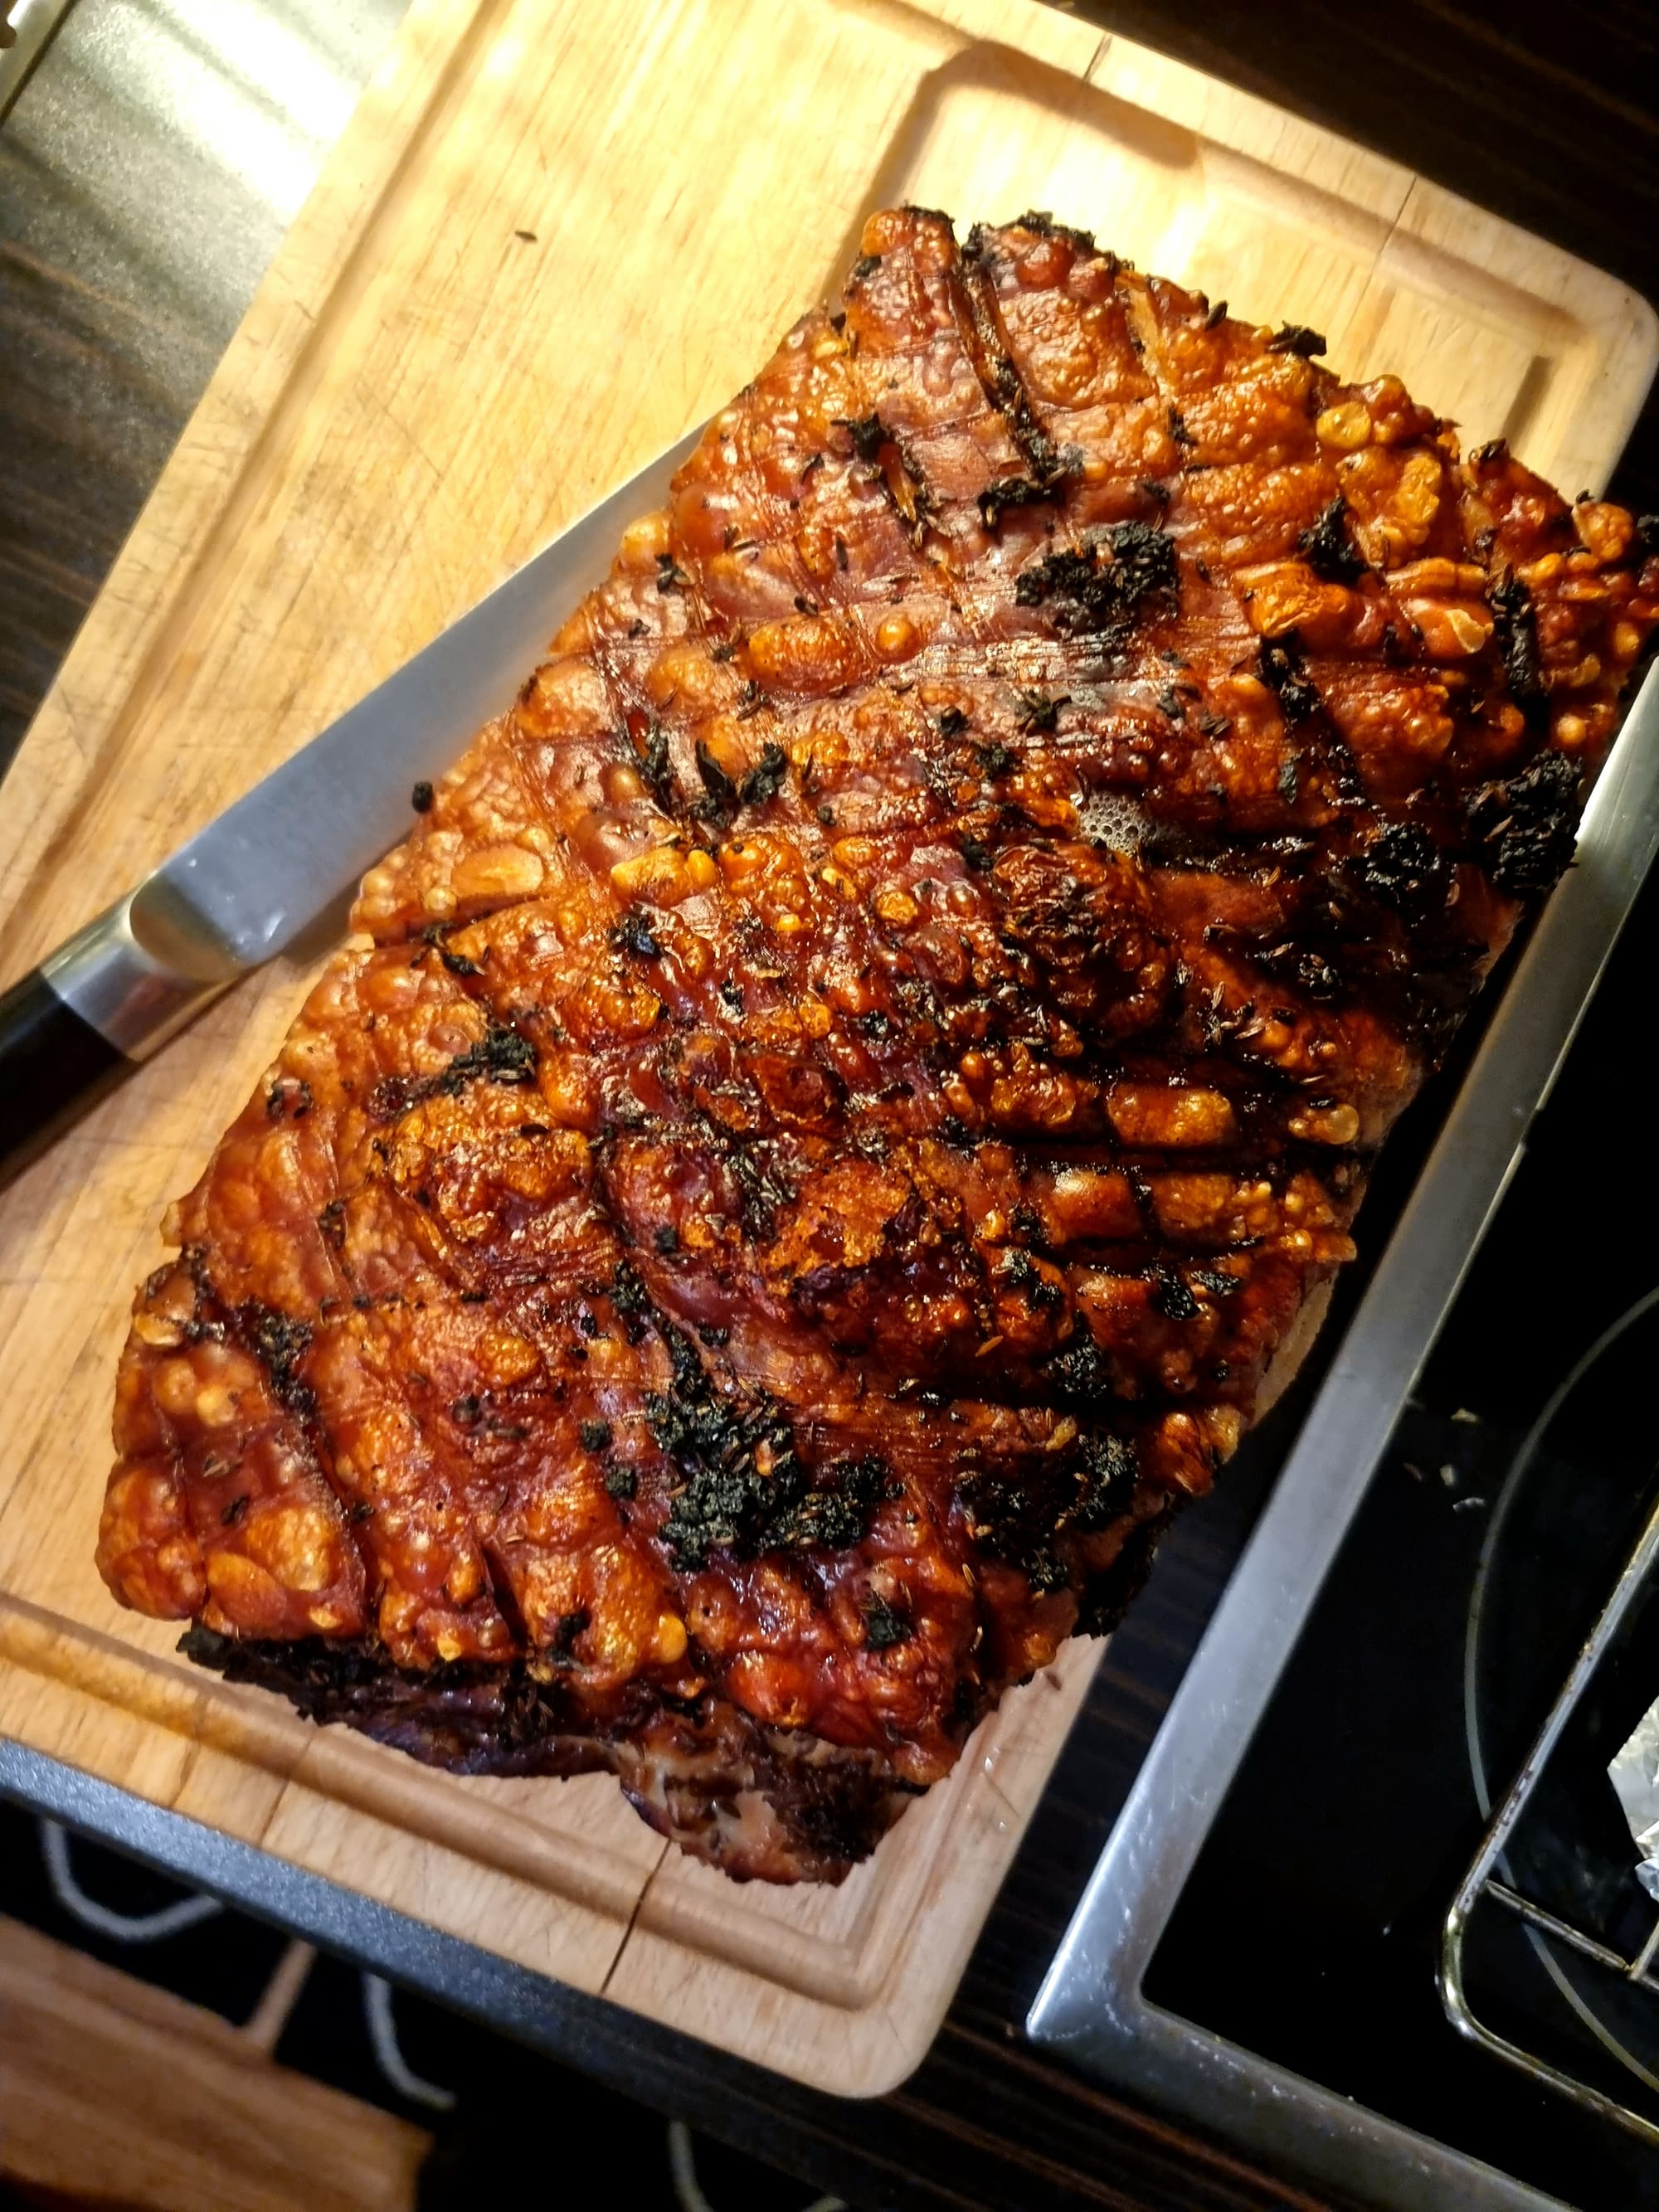 A pork with plenty of crackling on a wooden board